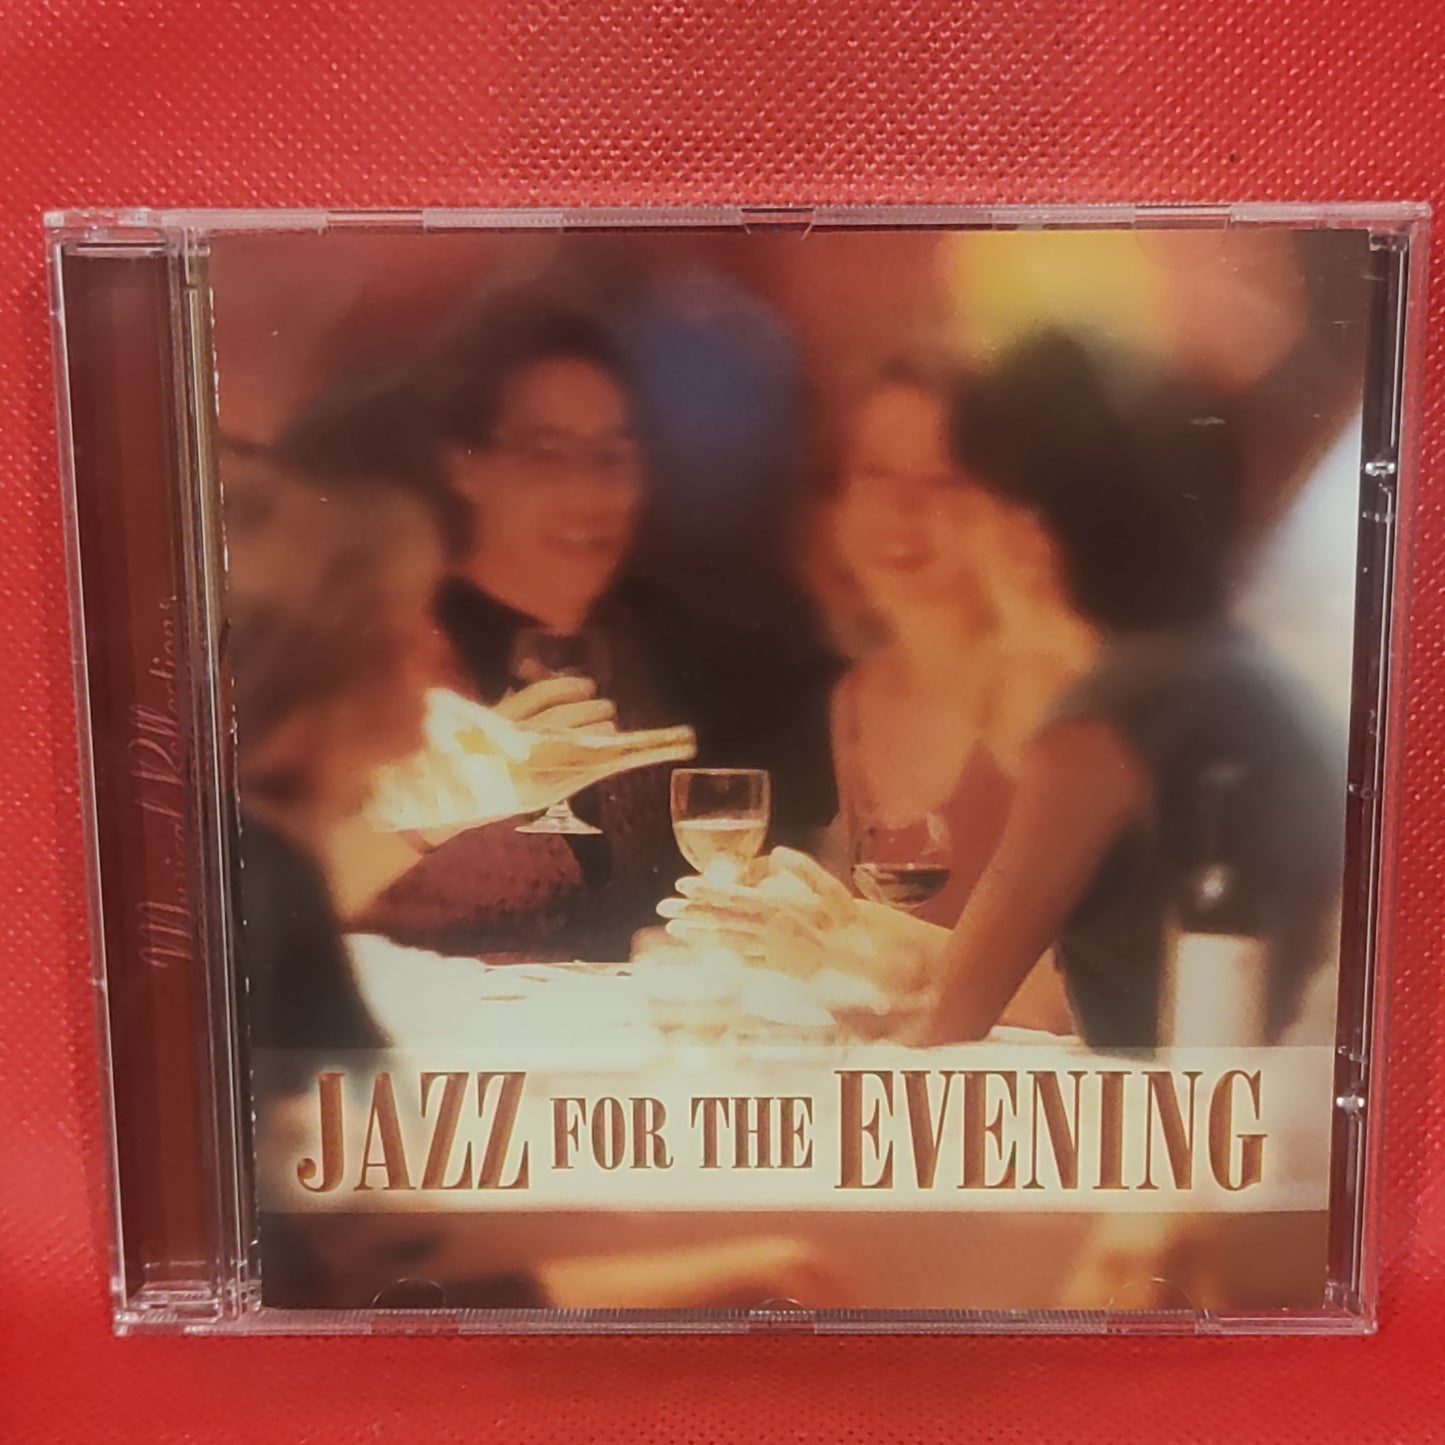 Jazz for the Evening - Musical reflections